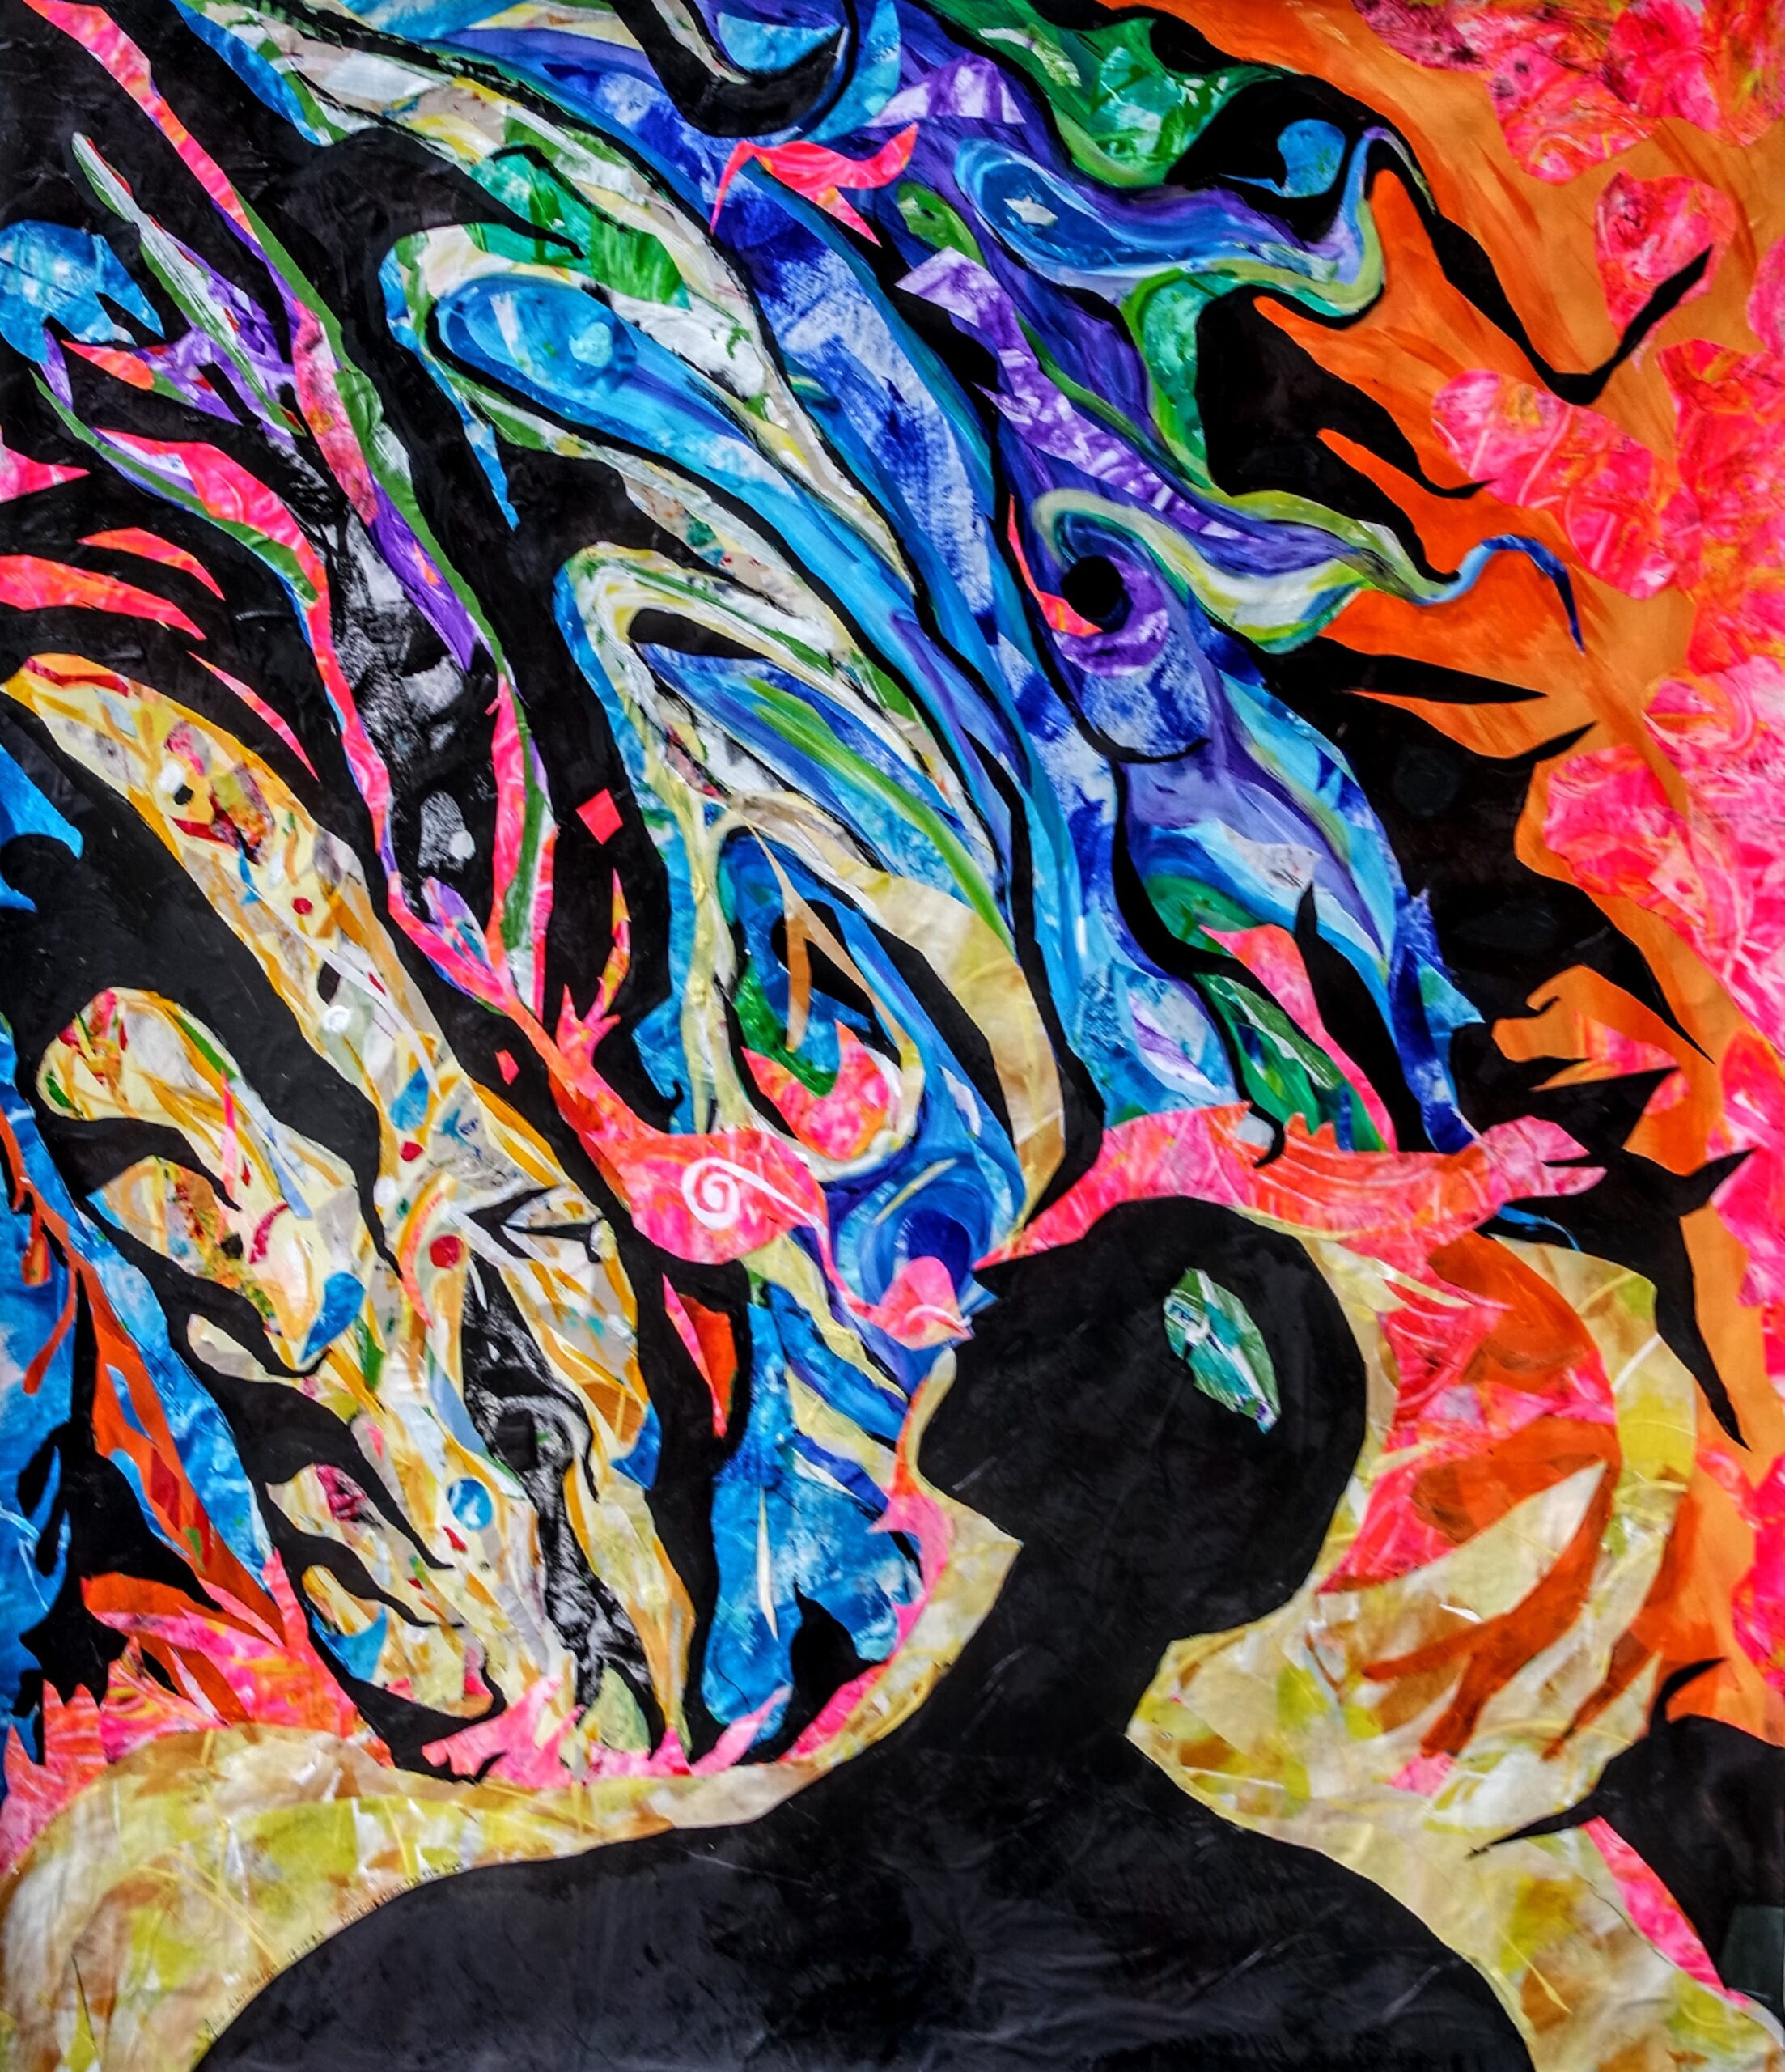 A mixed-media artwork depicting a dark figure from the shoulders up surrounded by swirling colors.